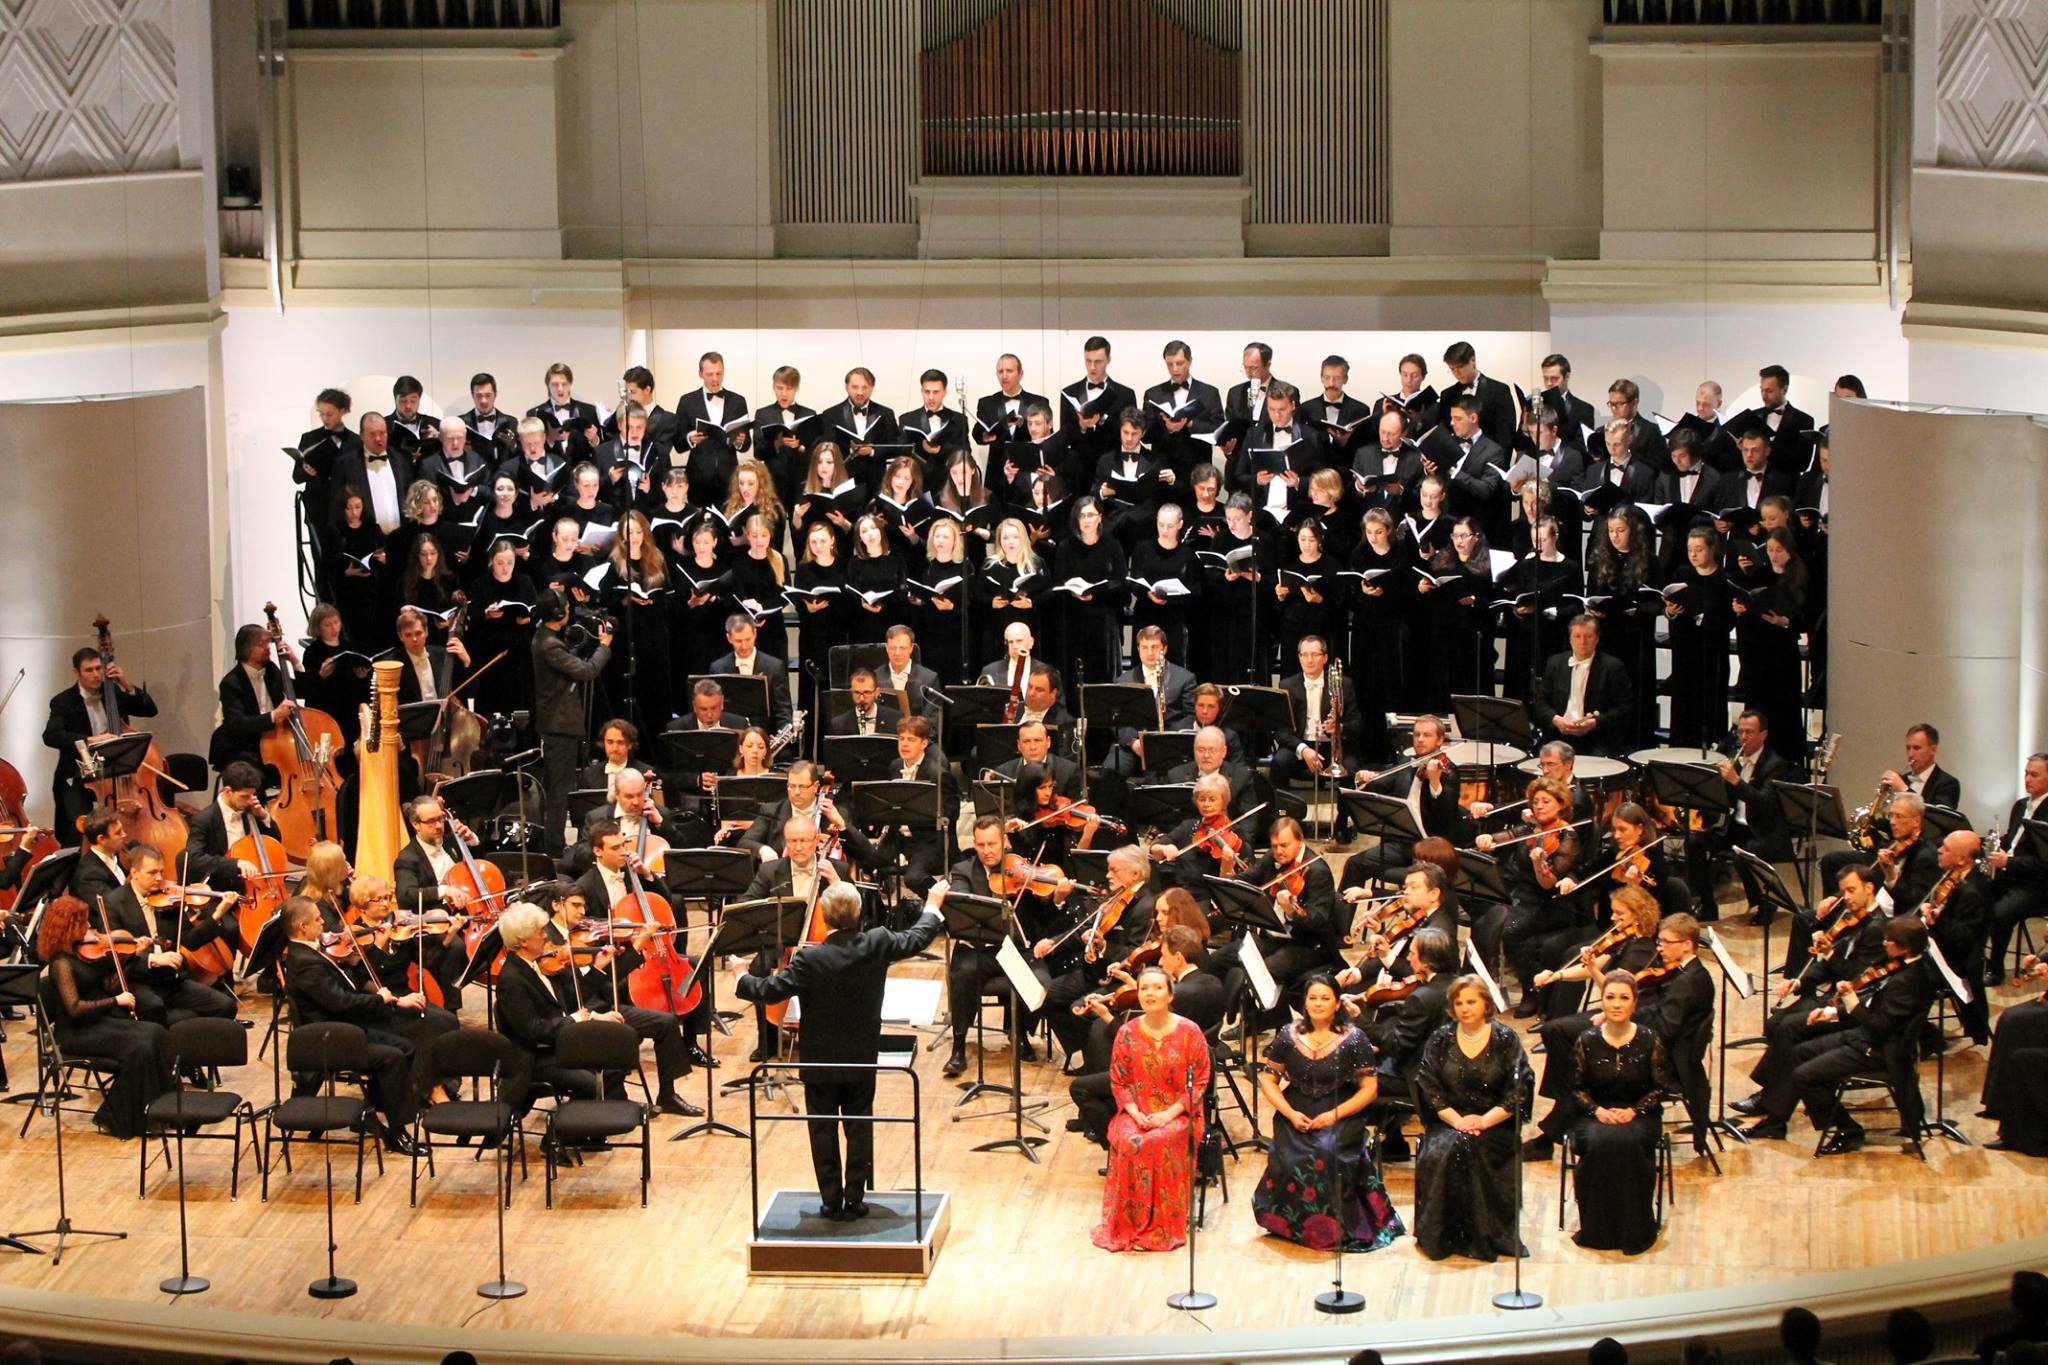 MRP’s Choir and Big Symphony Orchestra present “Eugene Onegin”